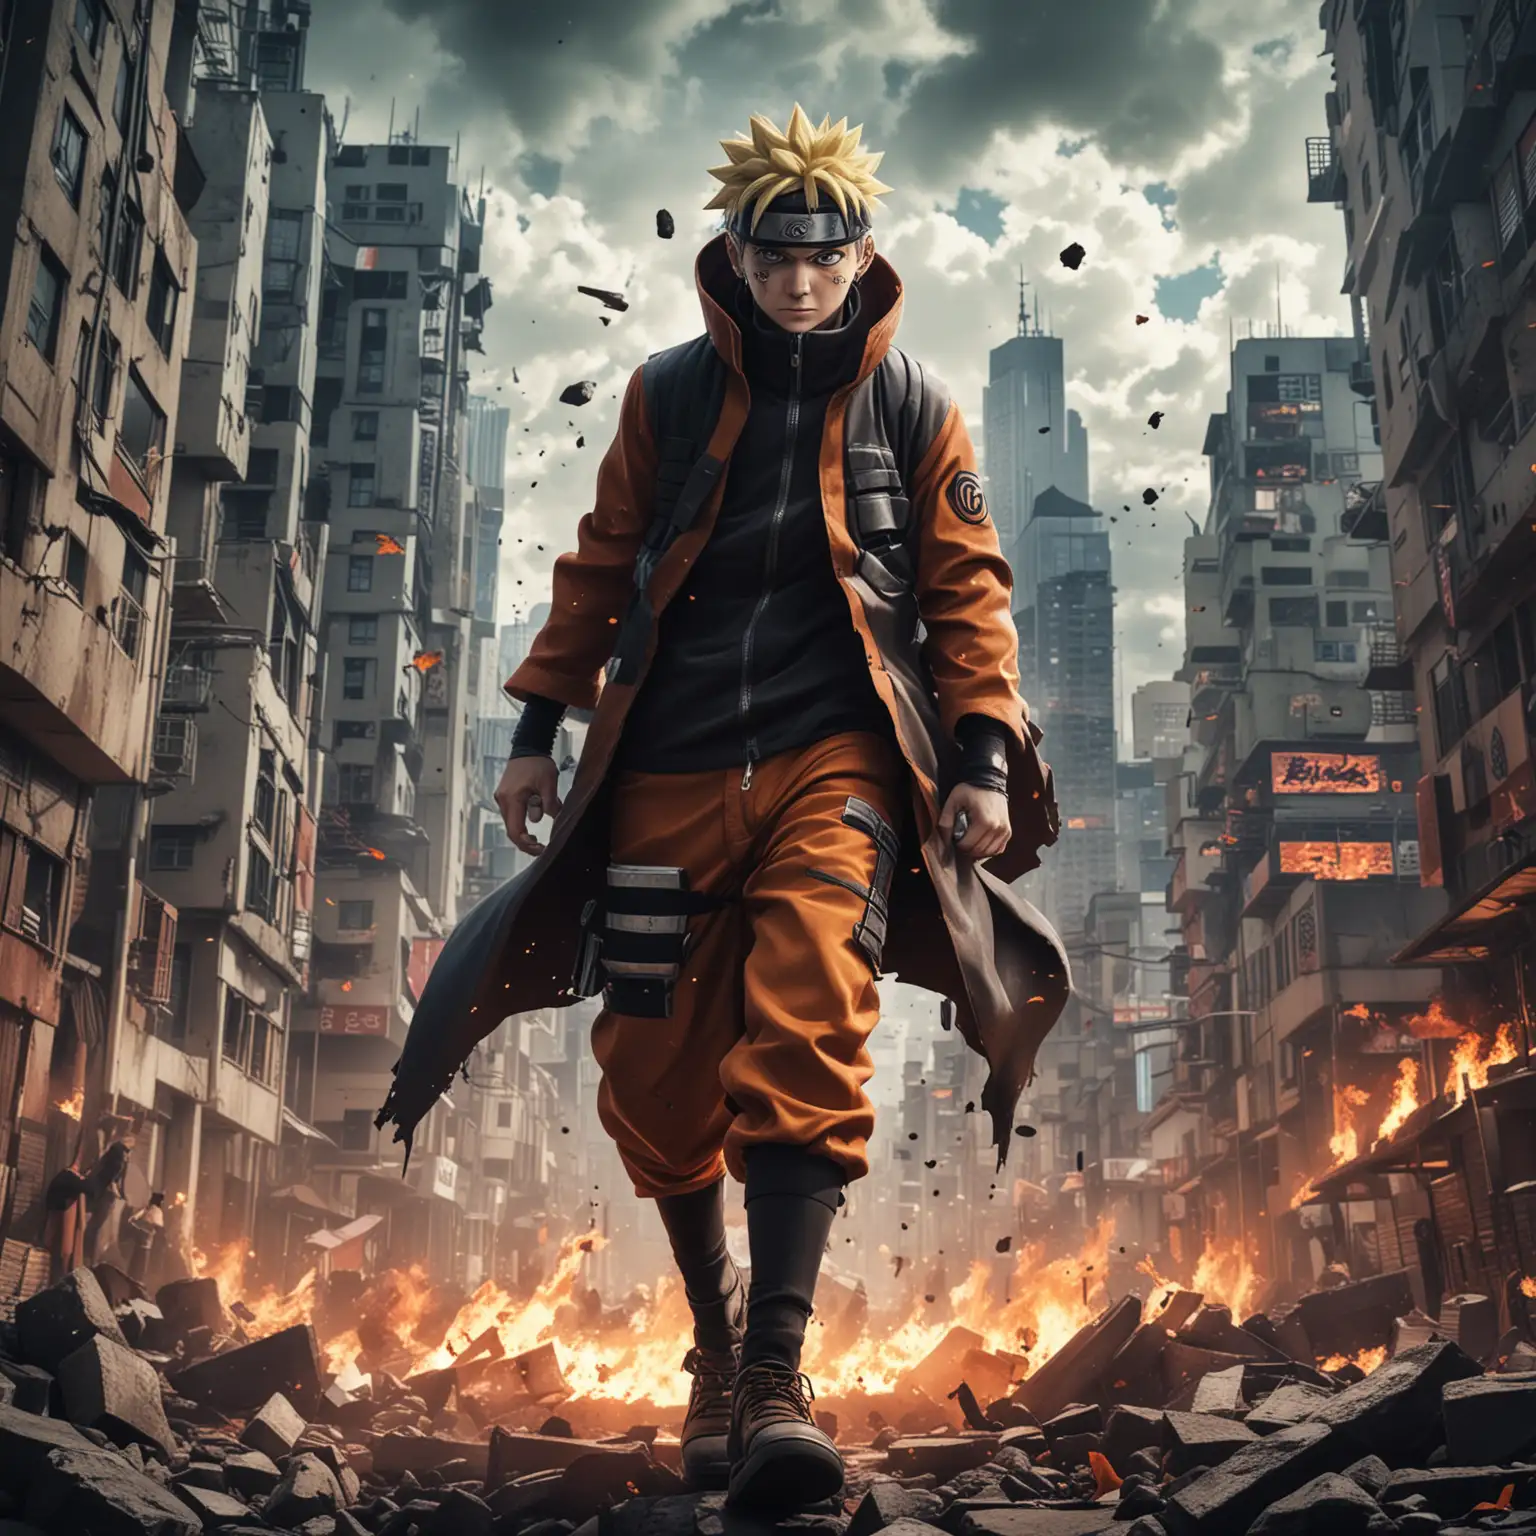 Naruto-Anime-Character-Protecting-Friends-in-City-Destruction-Scene